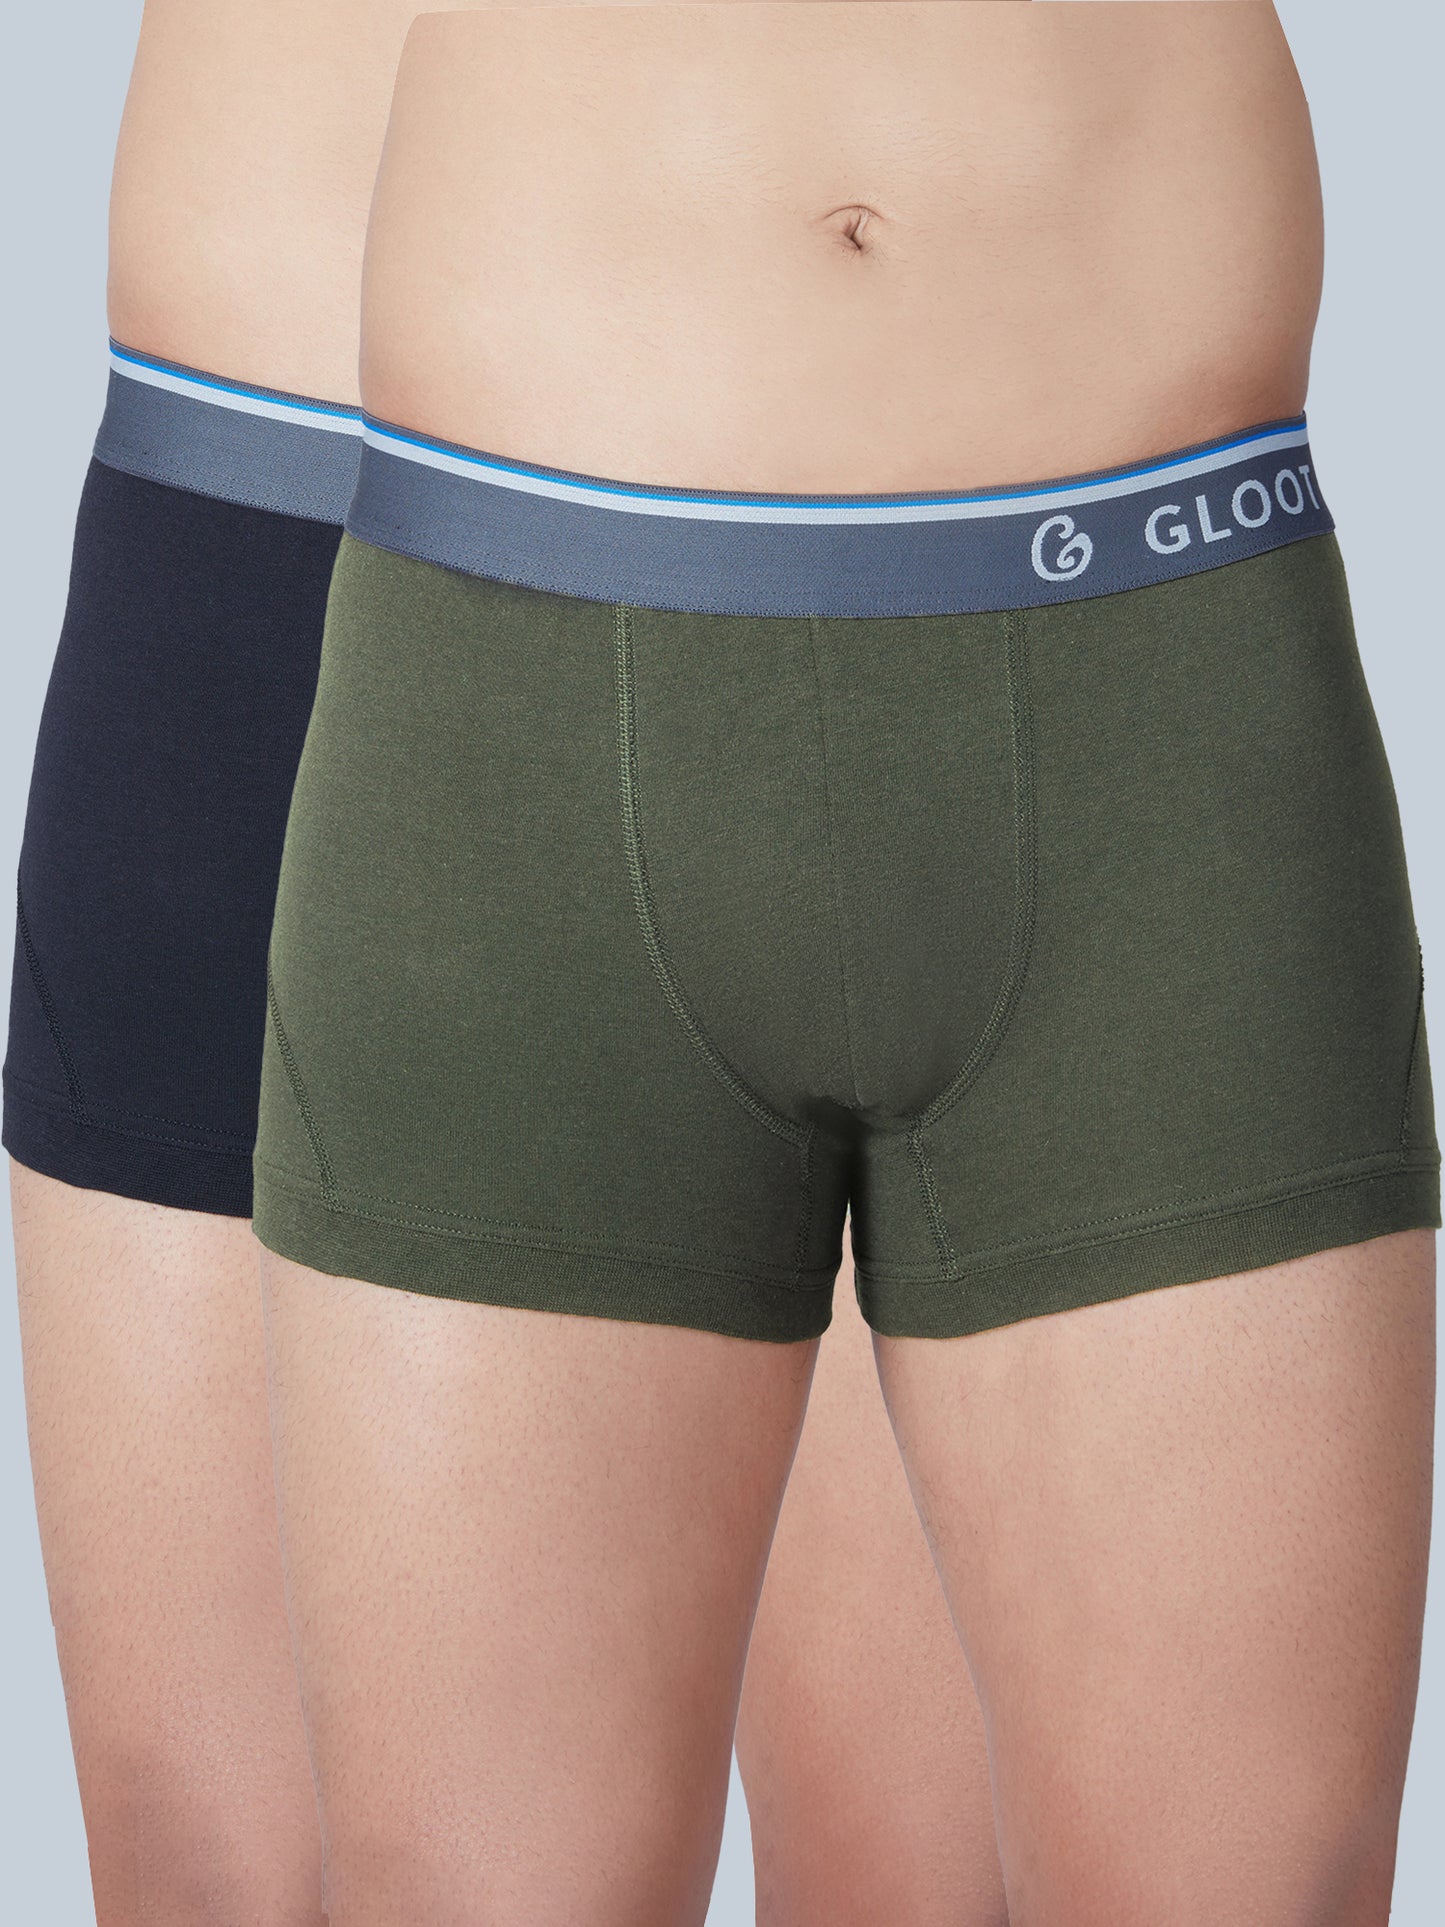 Butter Blend Cotton Trunk with No Itch elastic and Anti Odour Pack of 2 - GLI019 - Multicolor